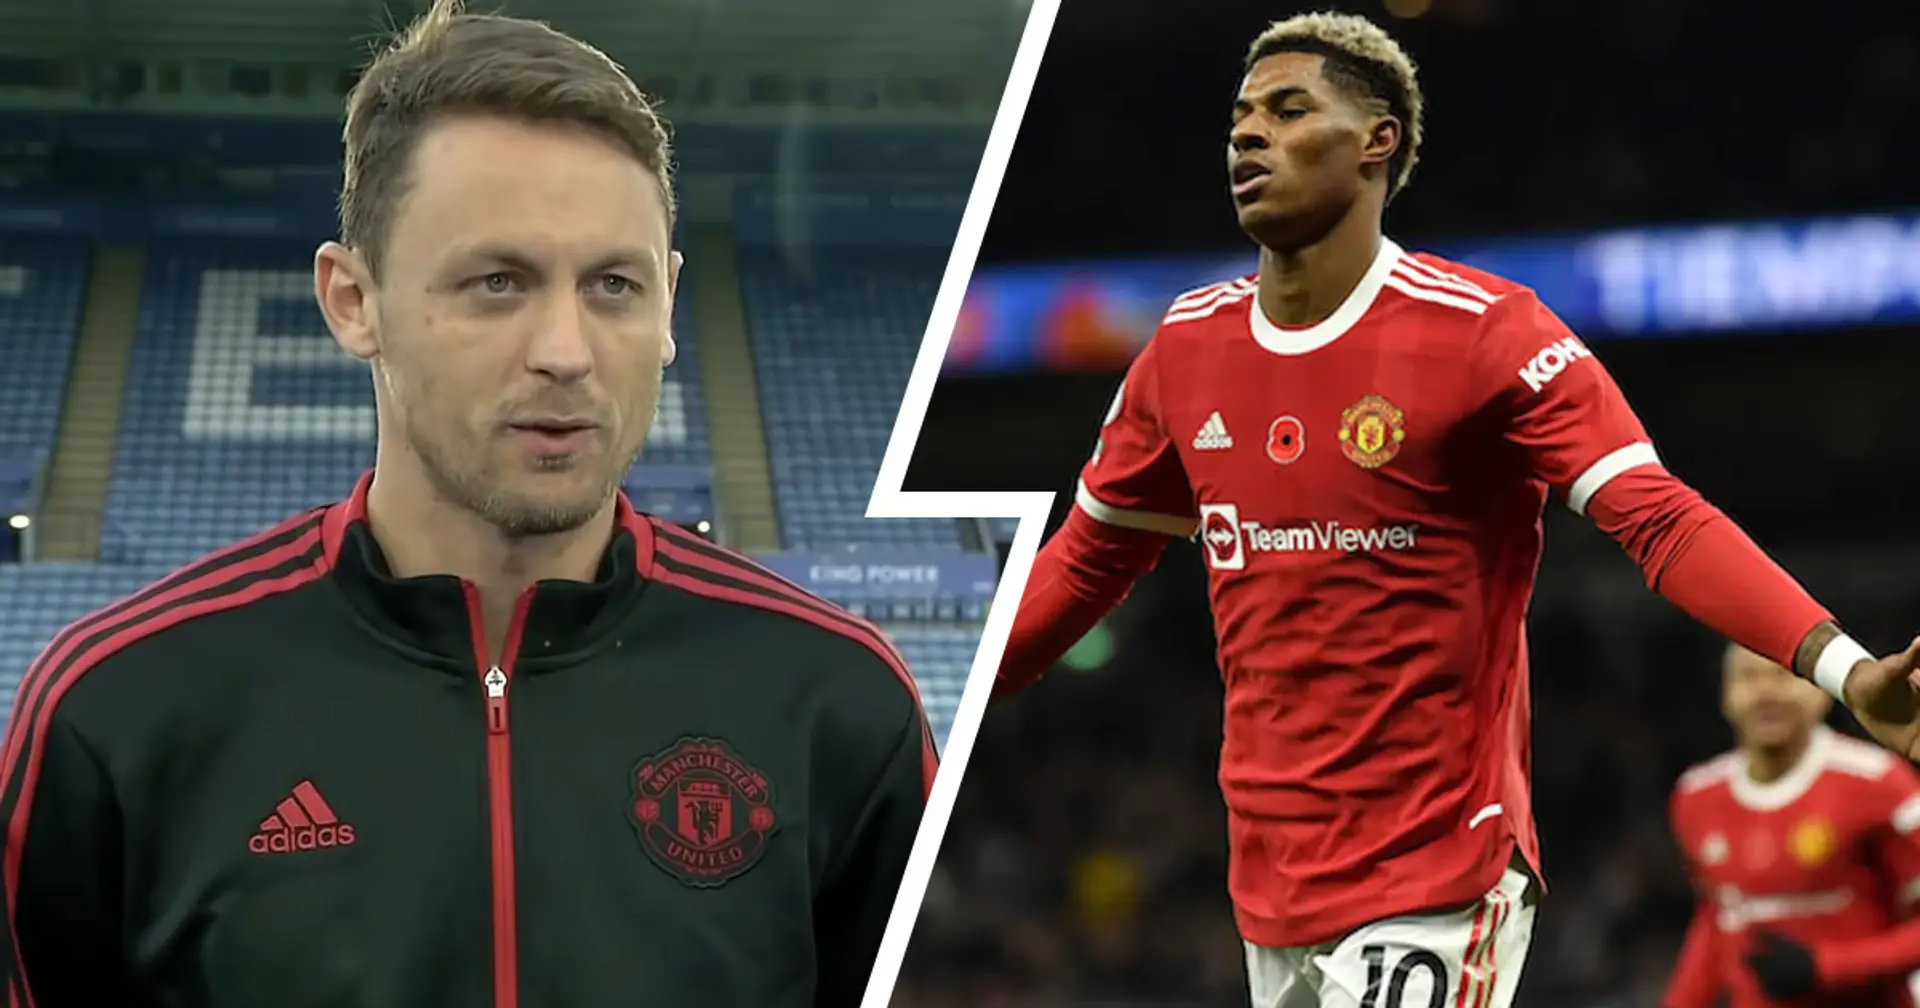 'It's definitely not me’: Matic reveals the 2 best dribblers at United